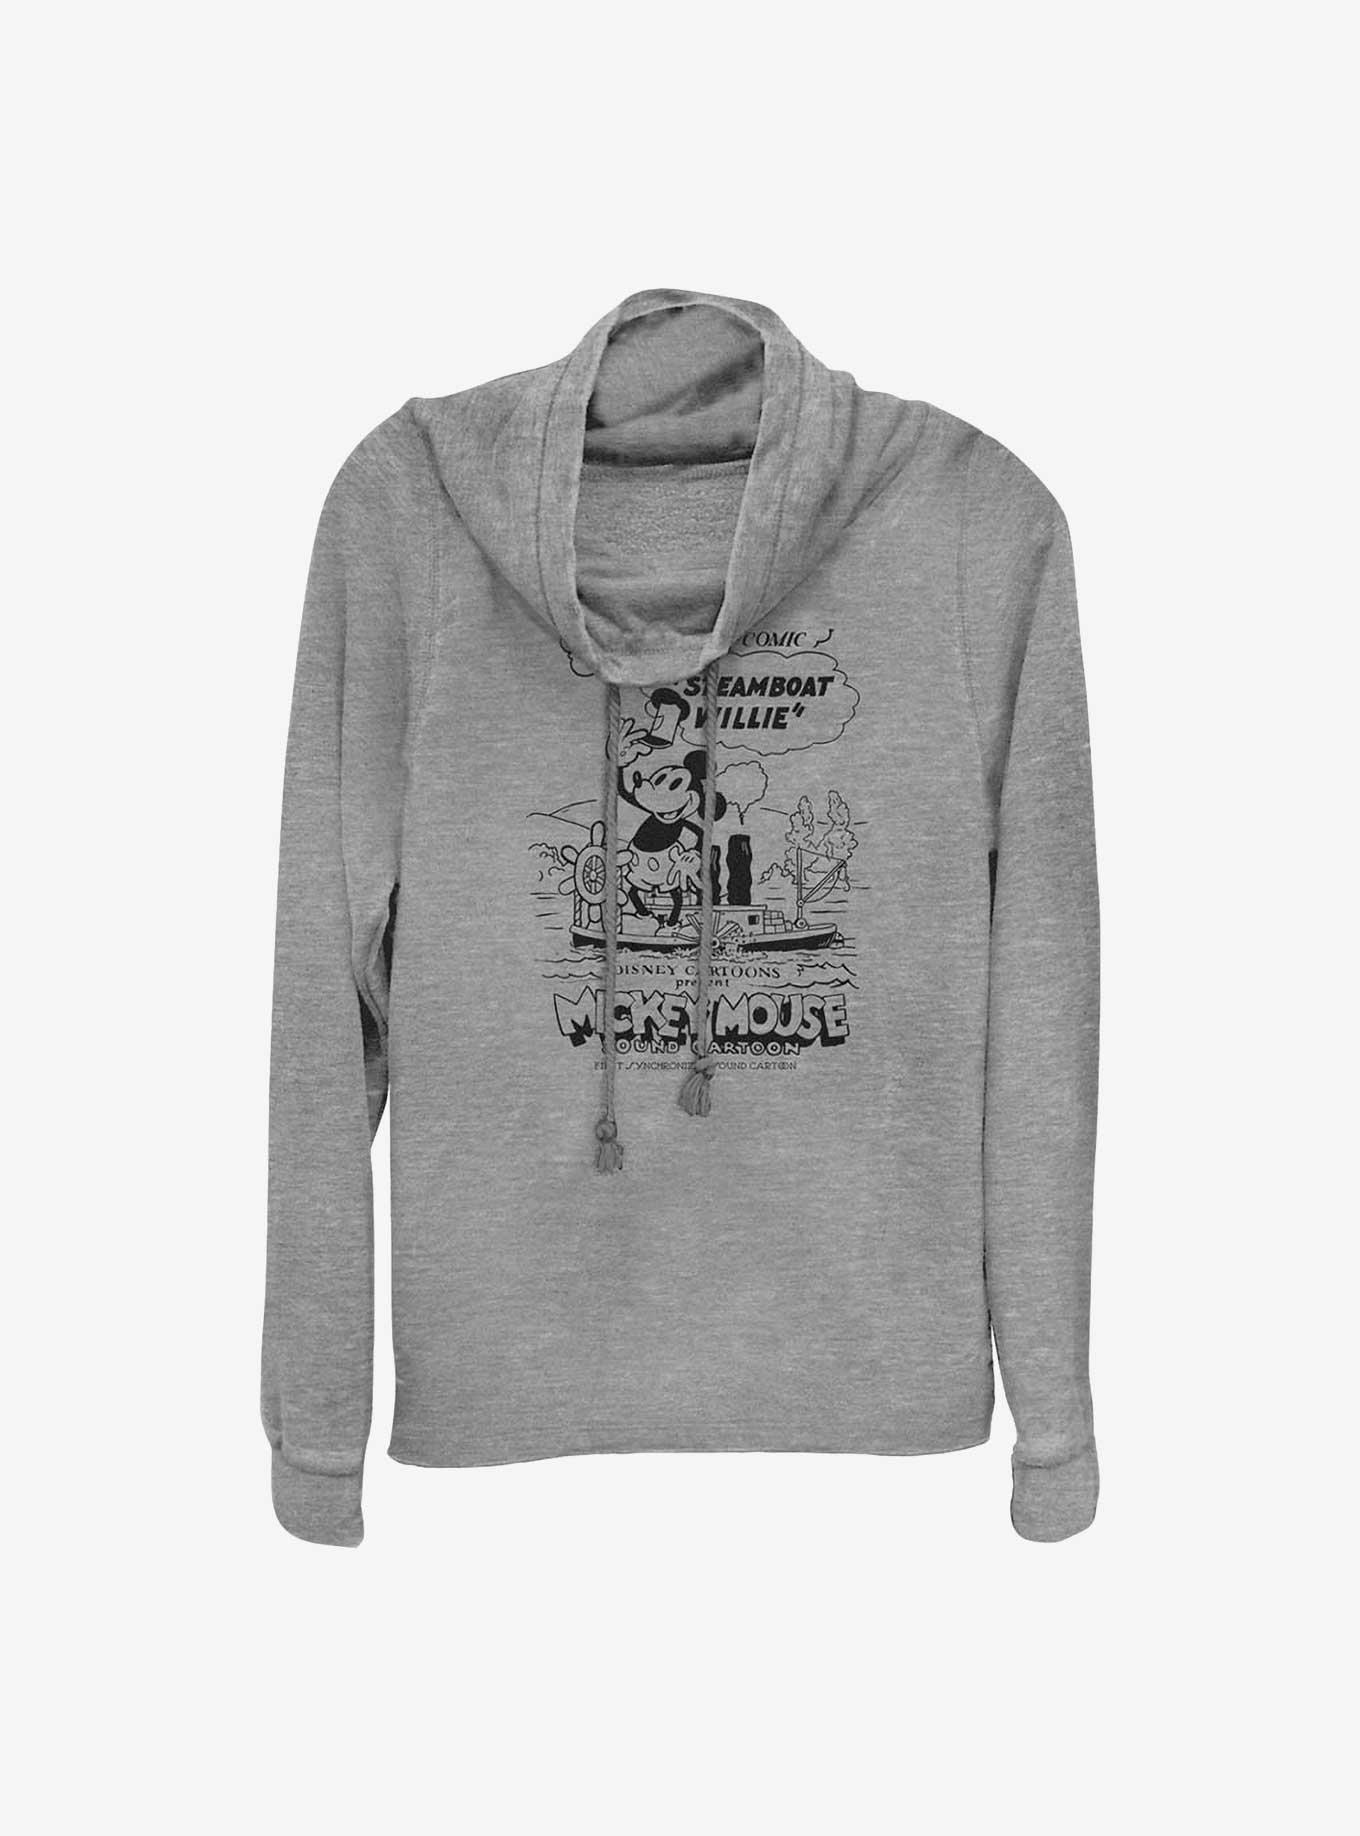 Disney 100 Steamboat Willie On Deck Cowl Neck Long-Sleeve Top